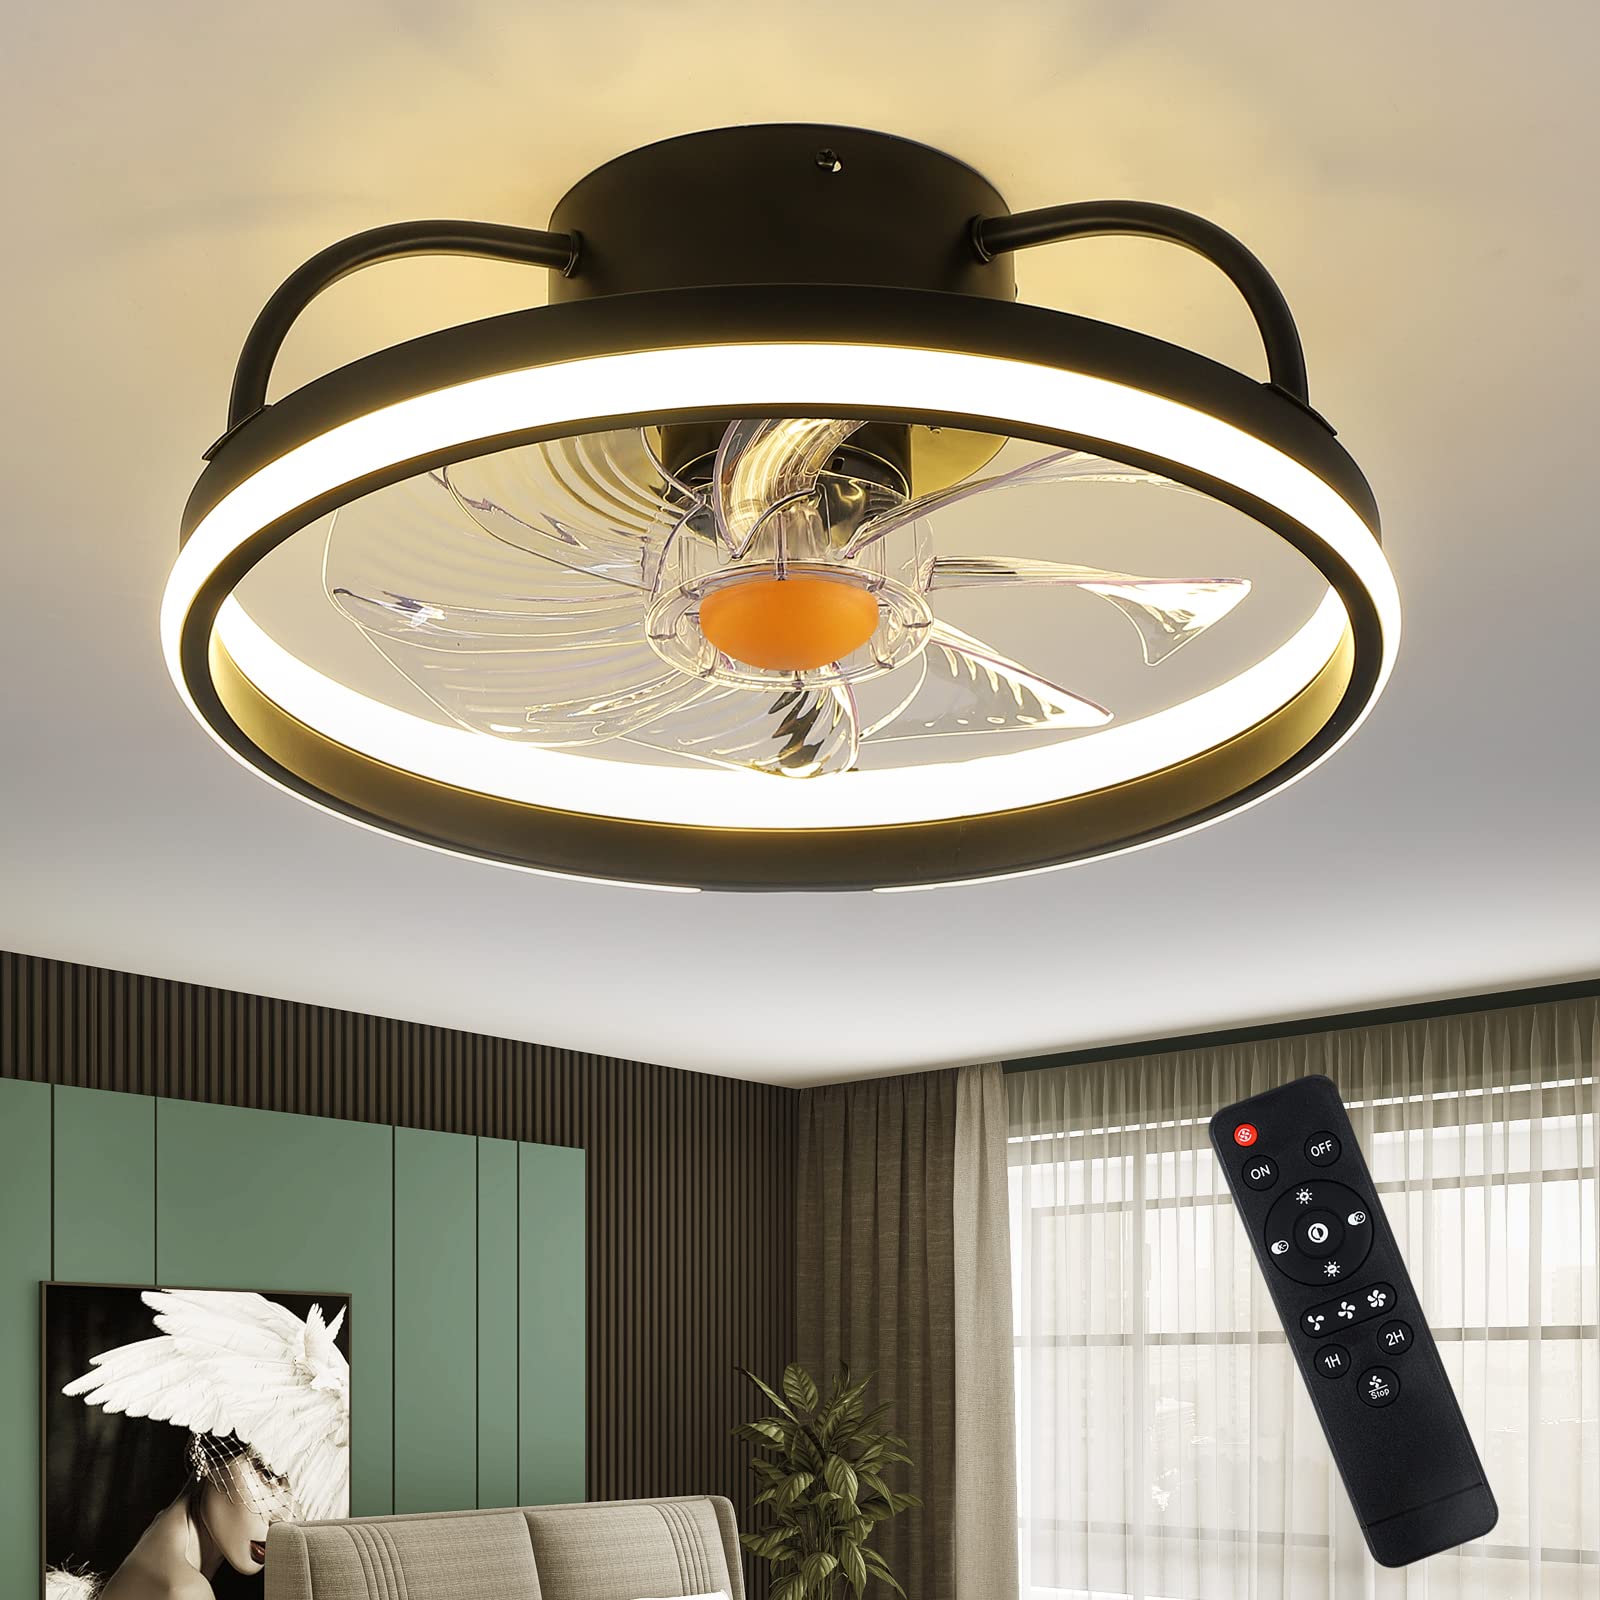 Mpayel Flush Mount Ceiling Fans with Lights and Remote Control，Modern Enclosed Bladeless,15'' Low Profile Ceiling Fan with Stepless Dimming Lighting Fixture for Bedroom Kitchen（Black）……